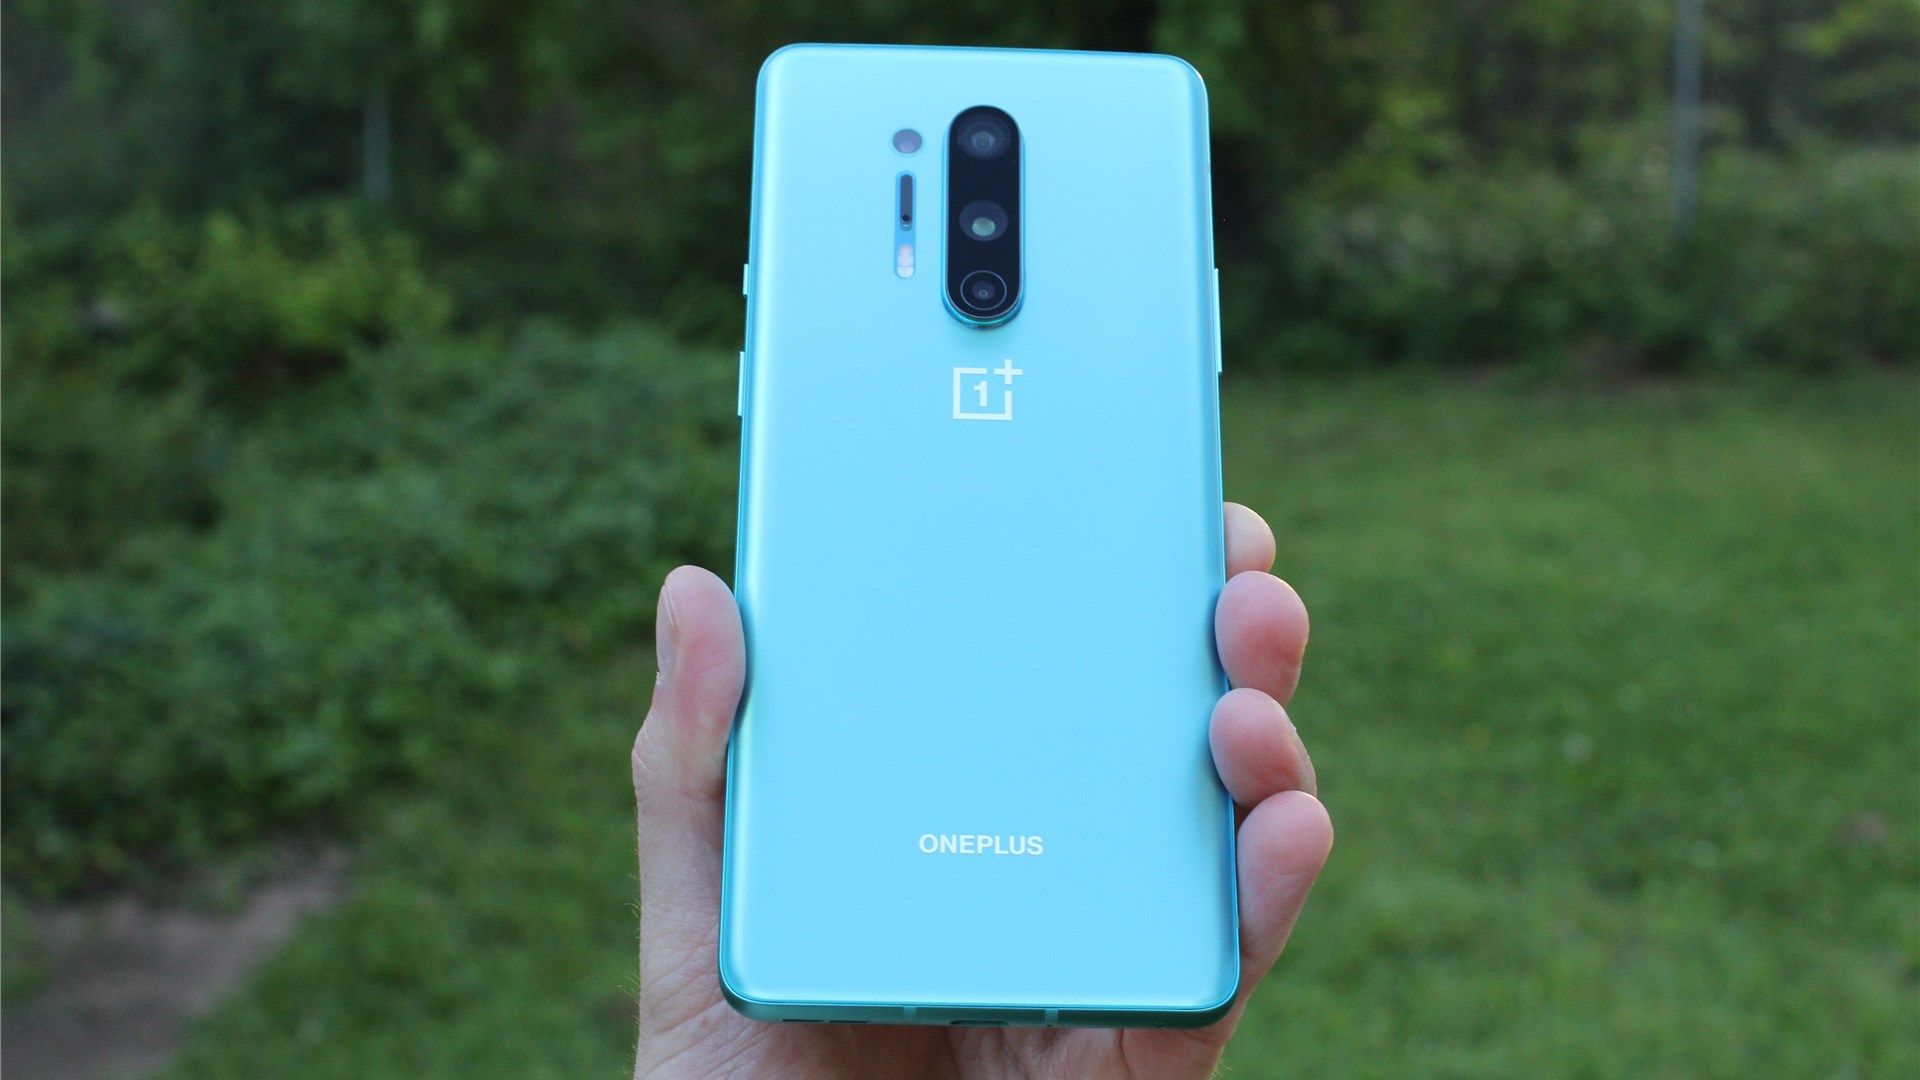 The OnePlus 8 Pro in Glacial Green.